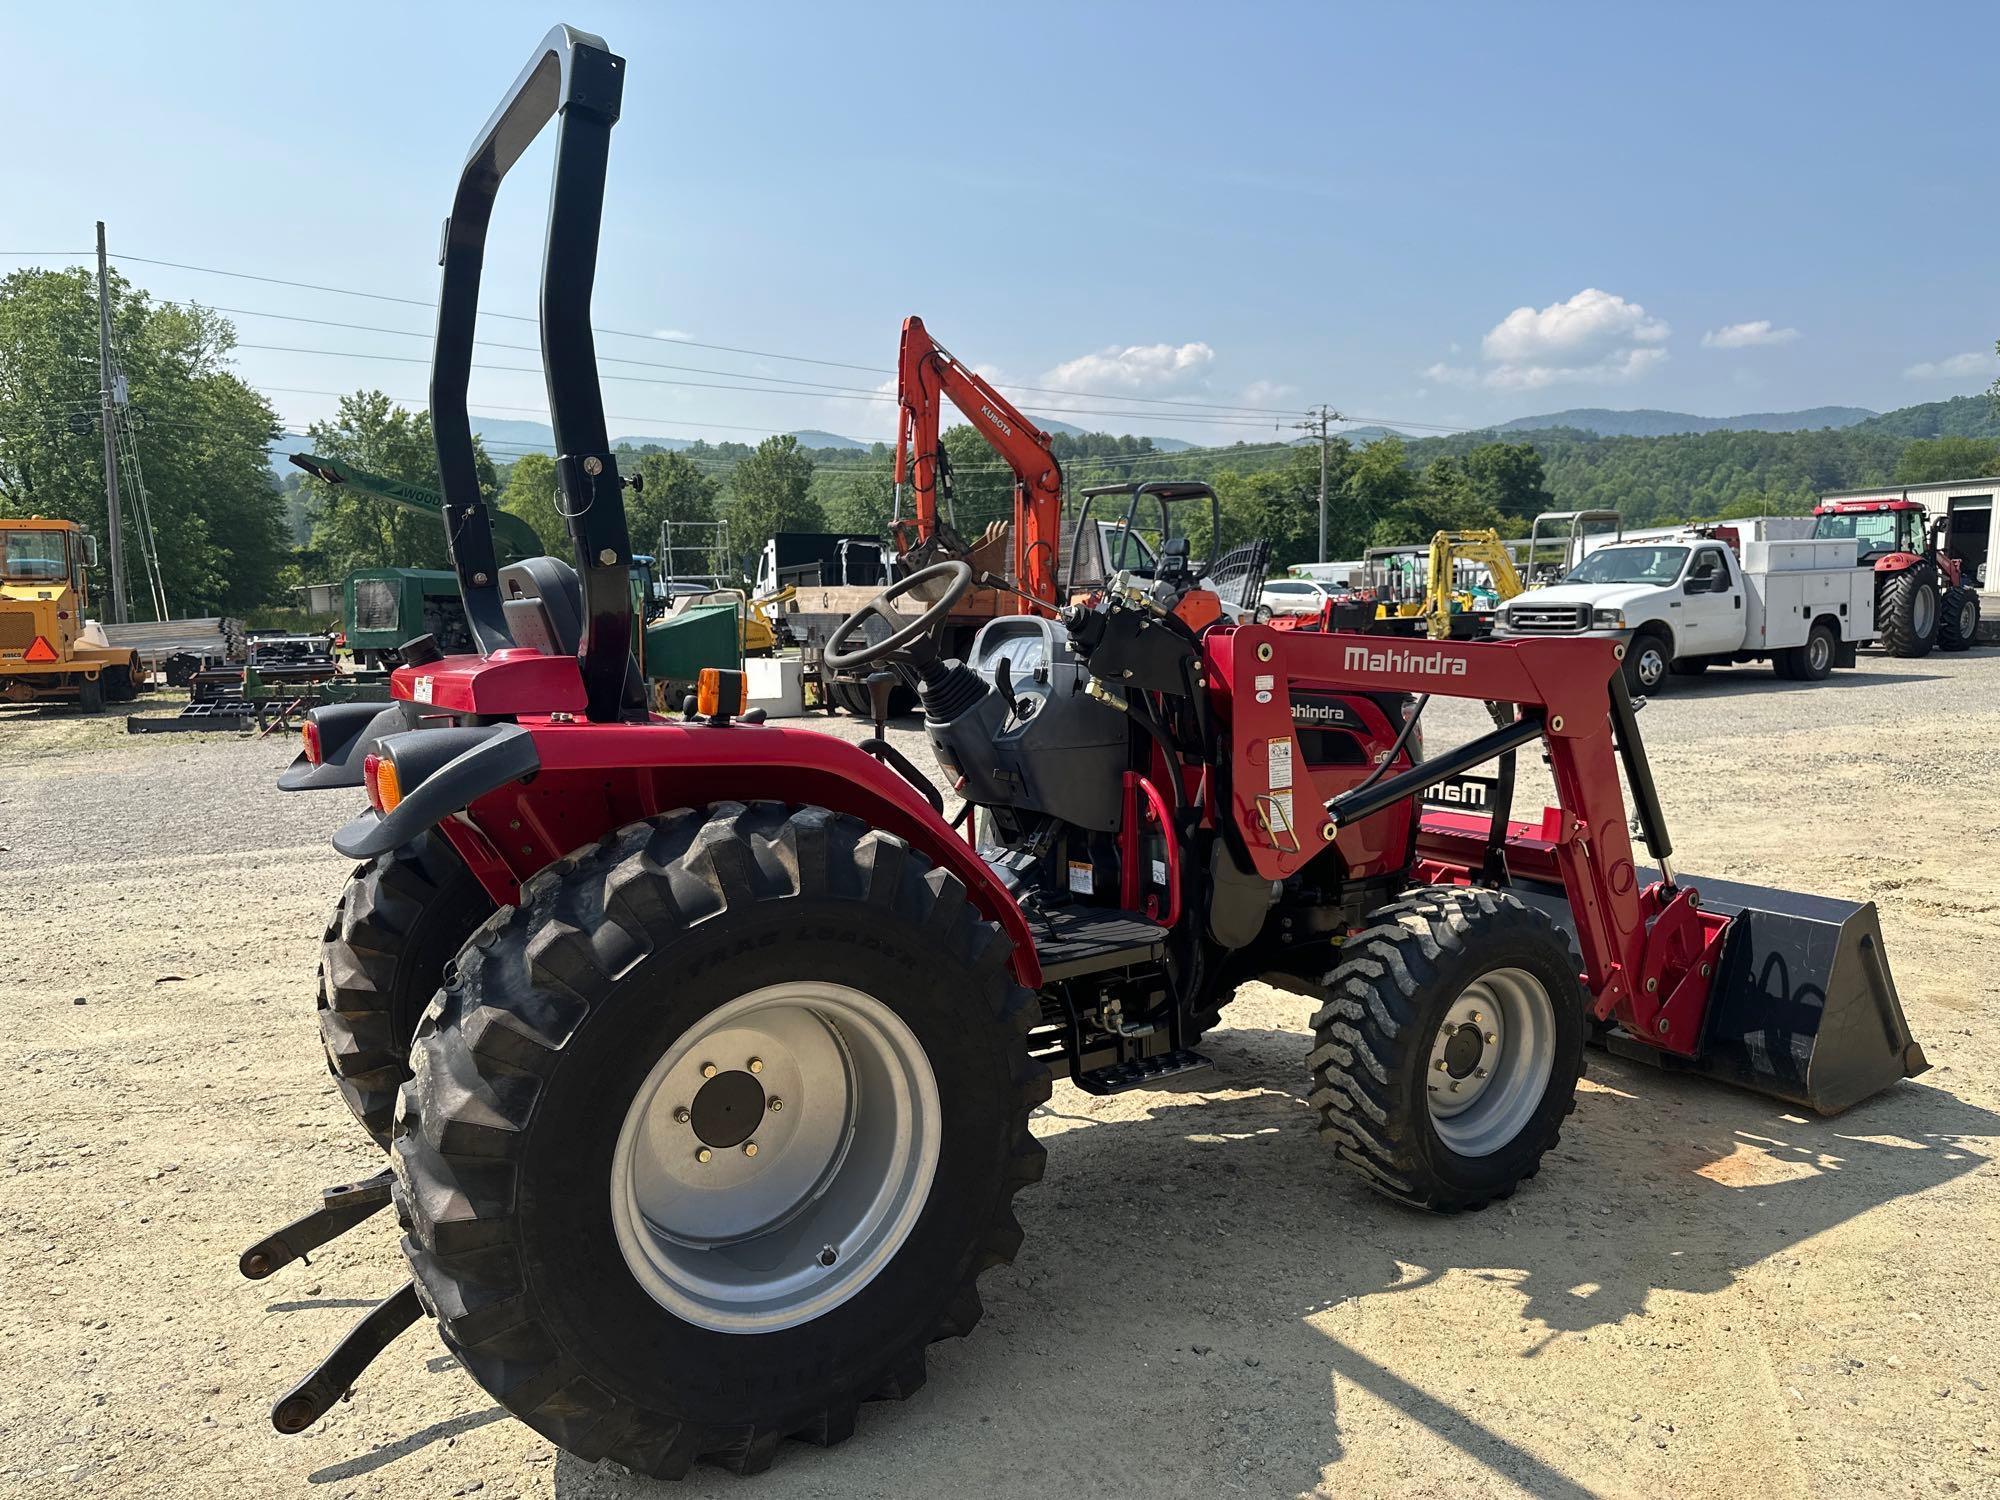 Mahindra 2540 4x4 Tractor with Loader